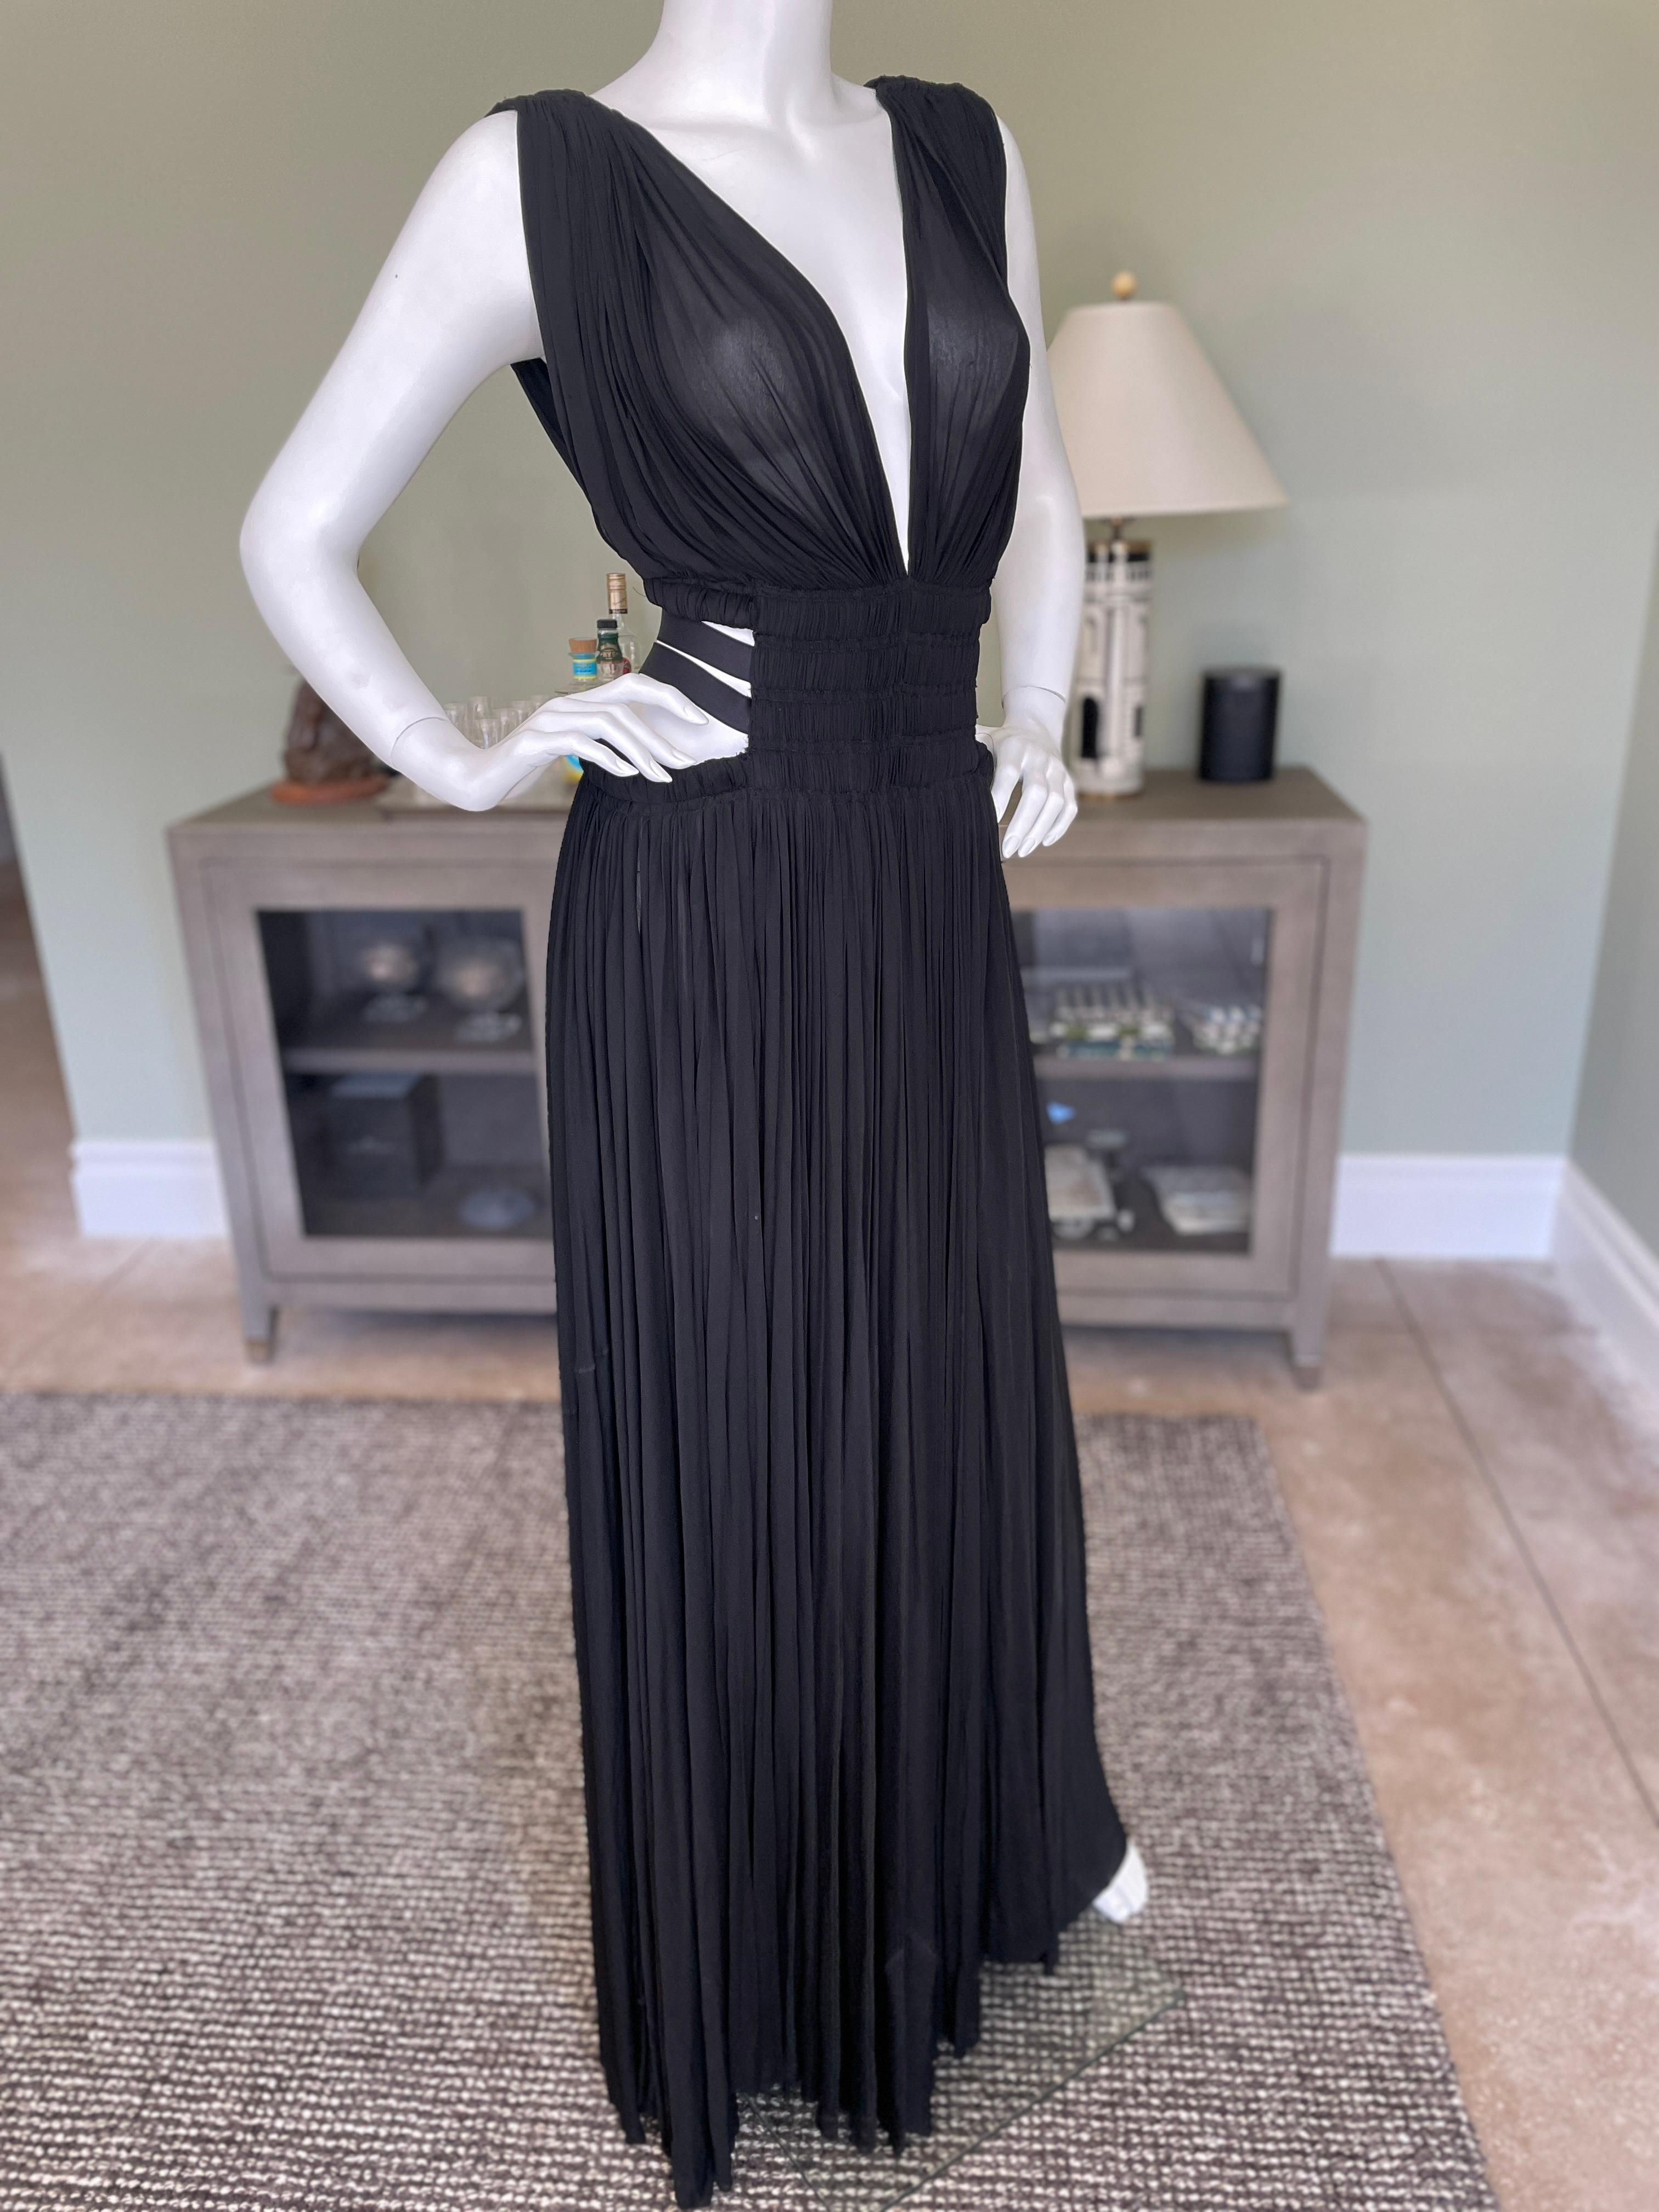 Azzedine Alaia 2004 Semi Sheer Black Pleated Goddess Gown with Side Straps In Good Condition For Sale In Cloverdale, CA